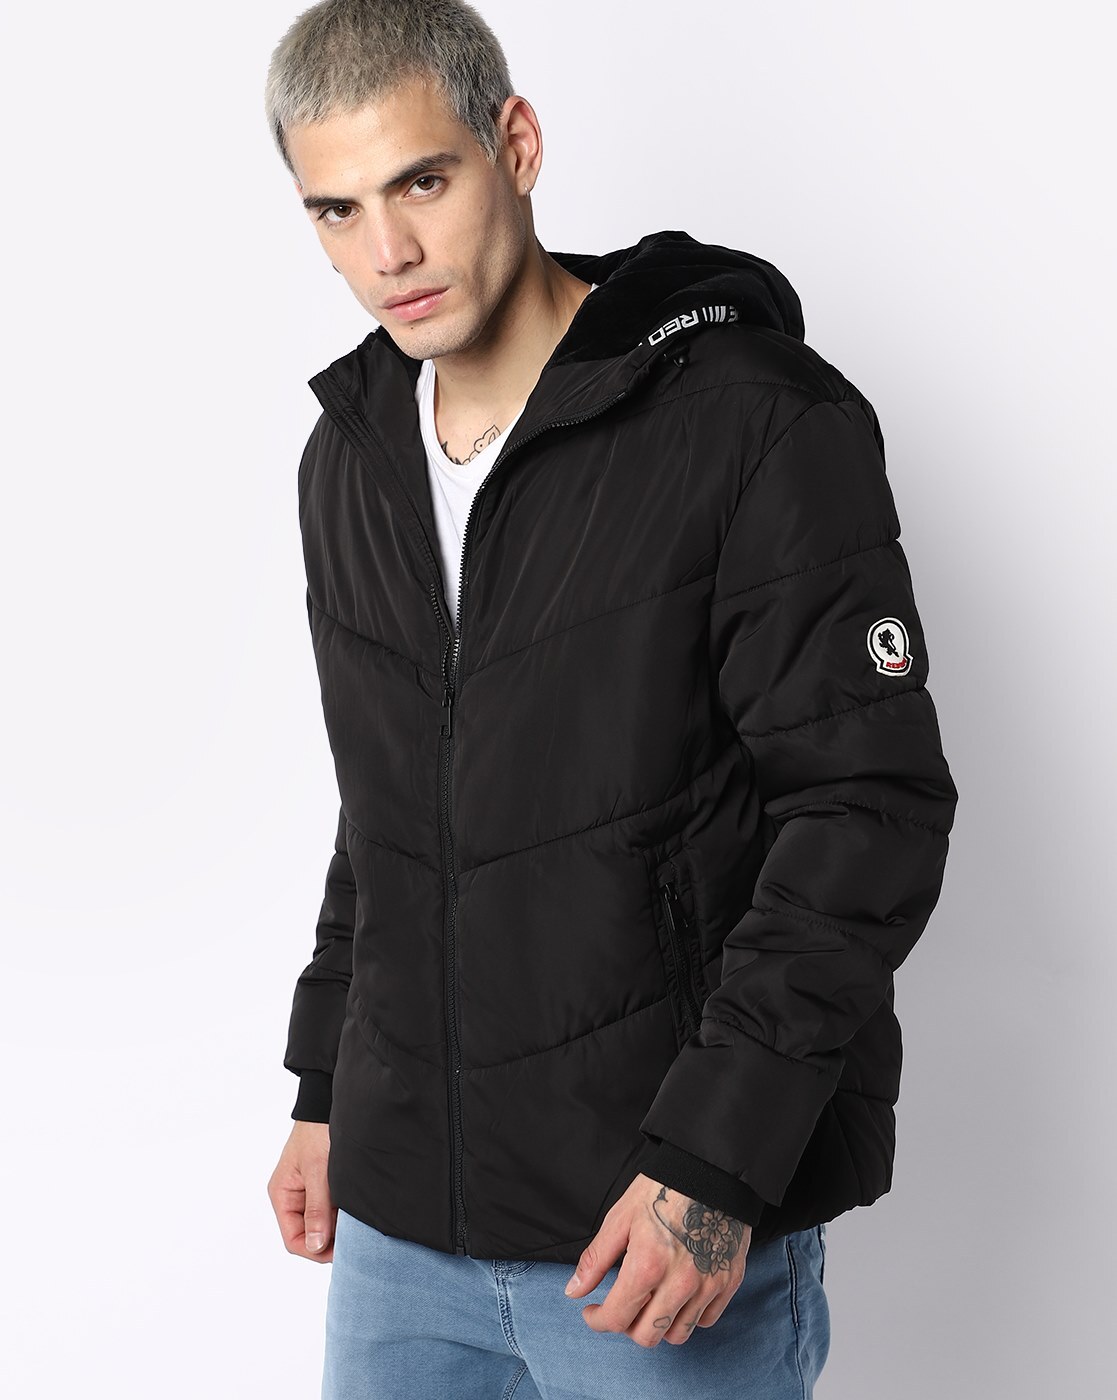 Designer Ajio Winter Jackets Mens For Men And Women Luxury Long Sleeve Coat  For Outdoor Activities, Windbreaker Clothes In Sizes M 3XL From  Marksunshine1988, $19.8 | DHgate.Com